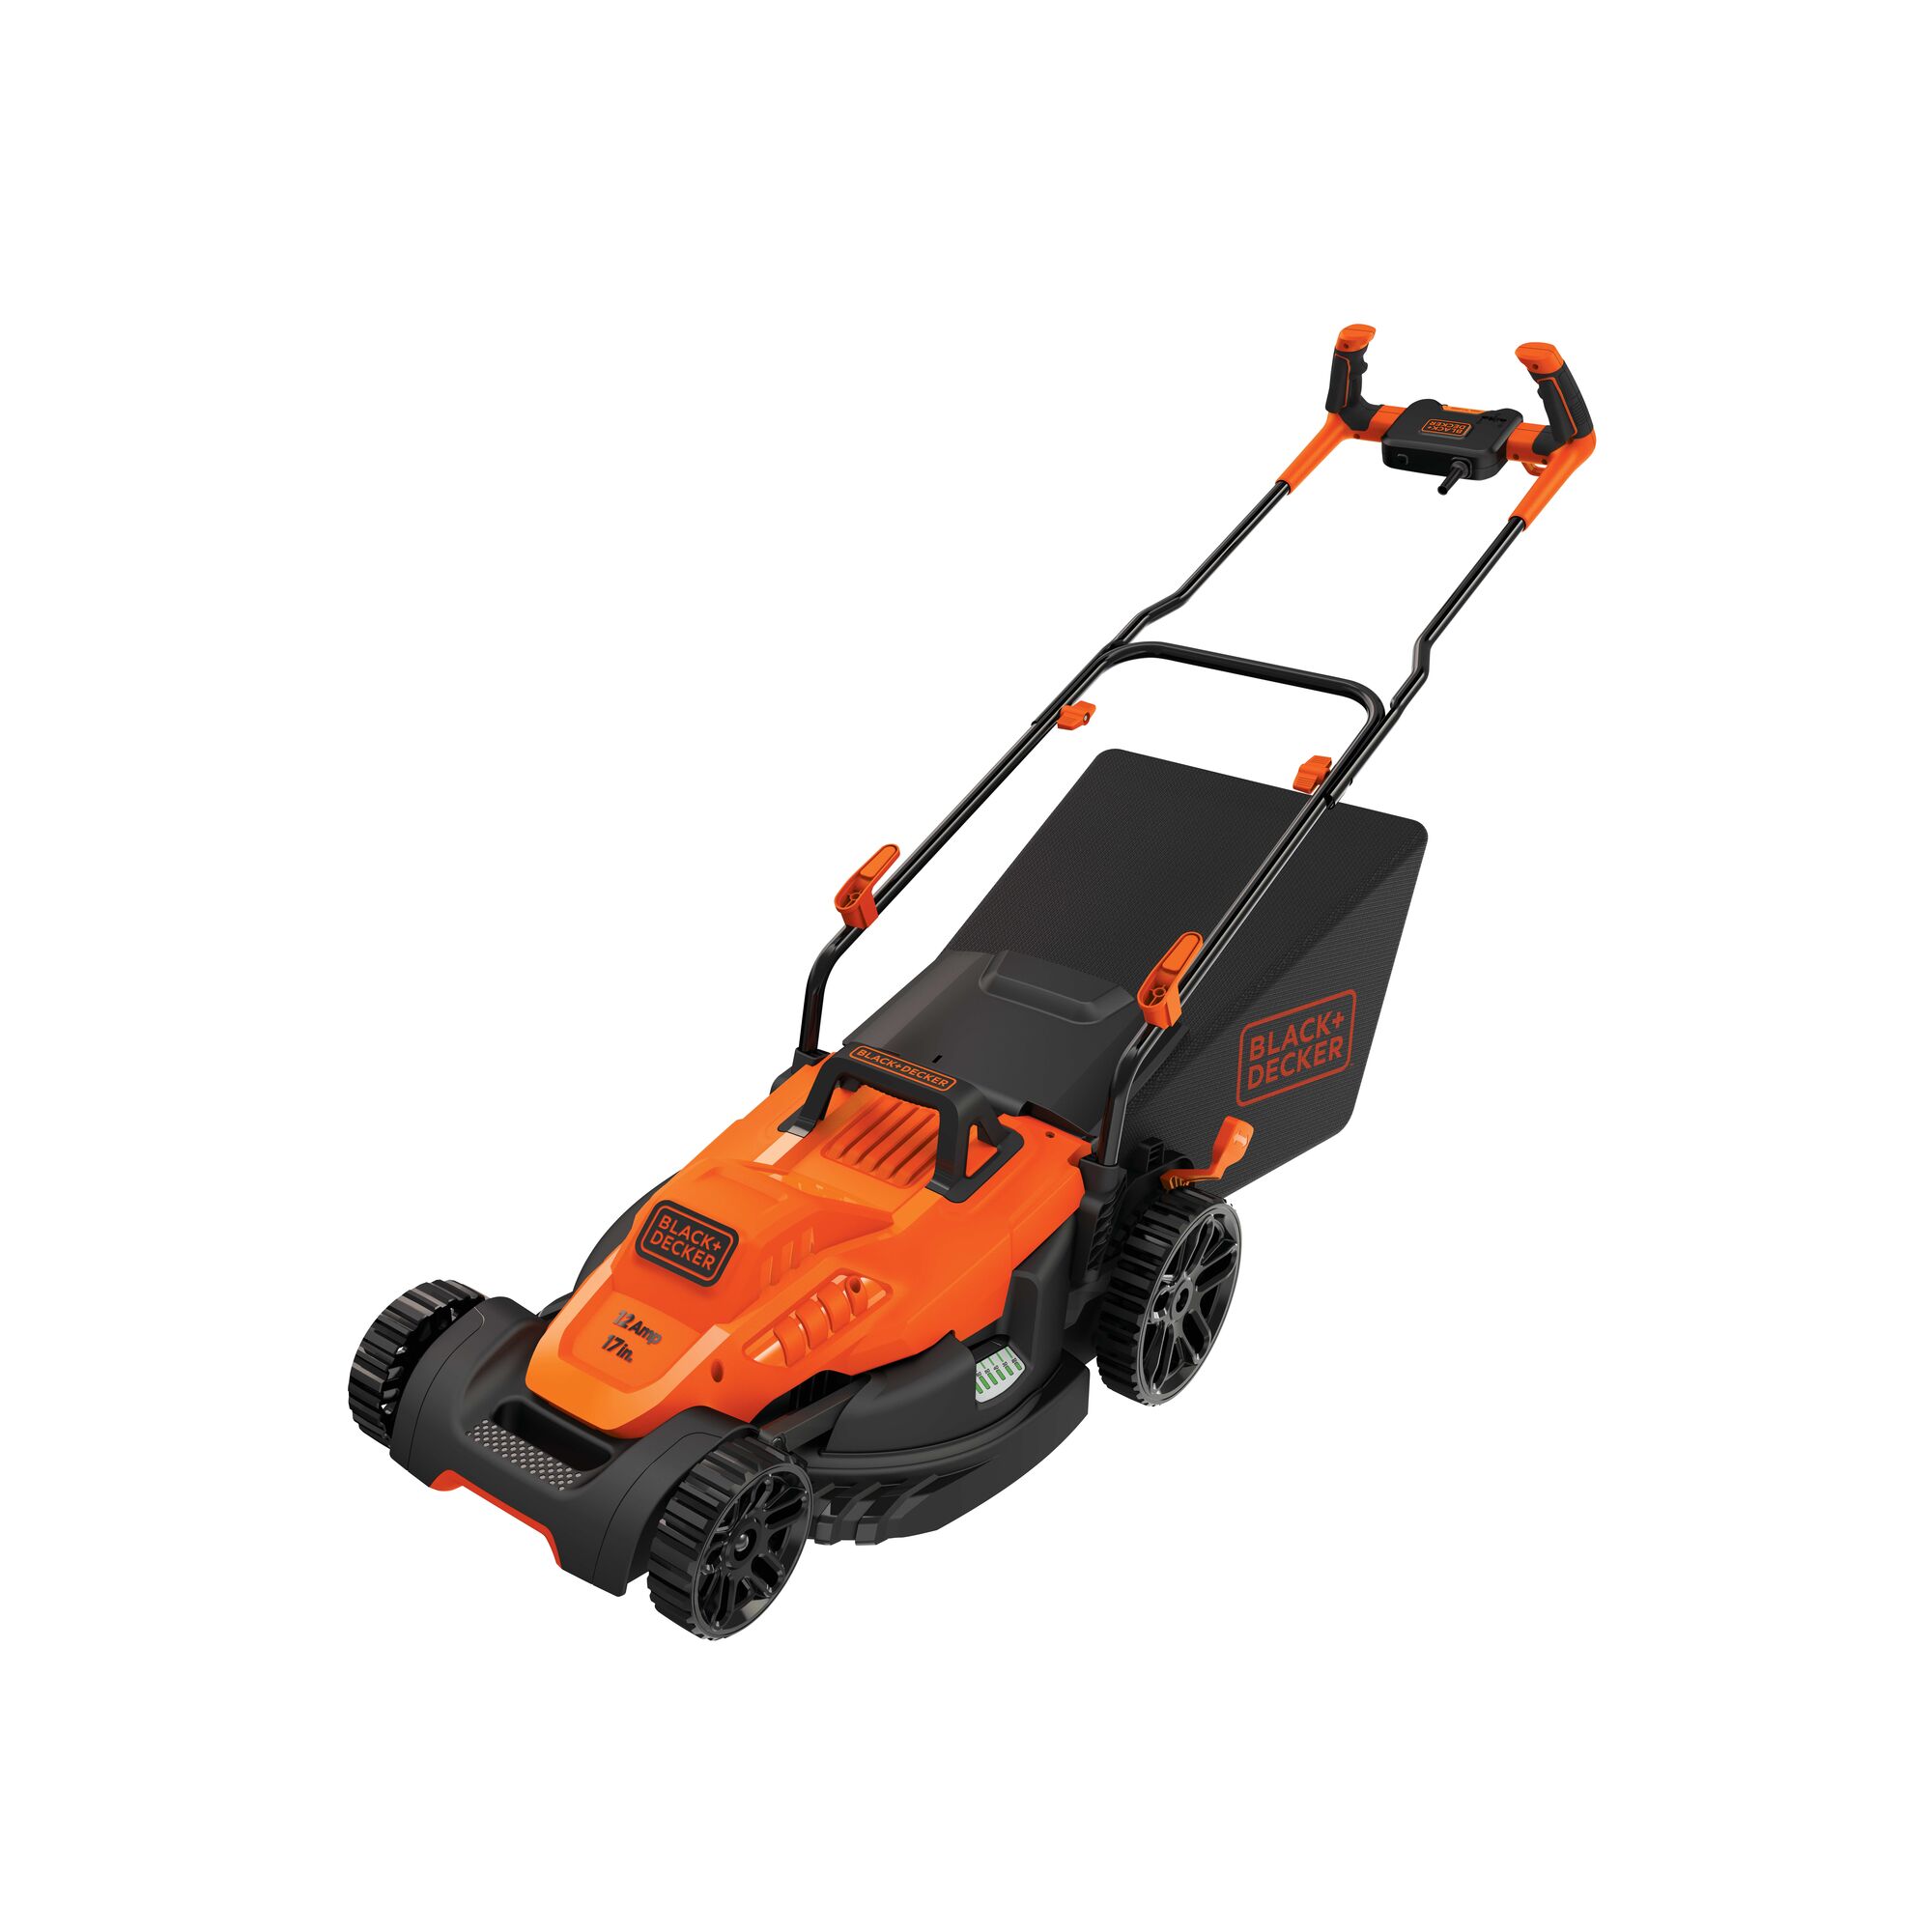 12 Amp 17 inch Electric Lawn Mower with Comfort Grip Handle.